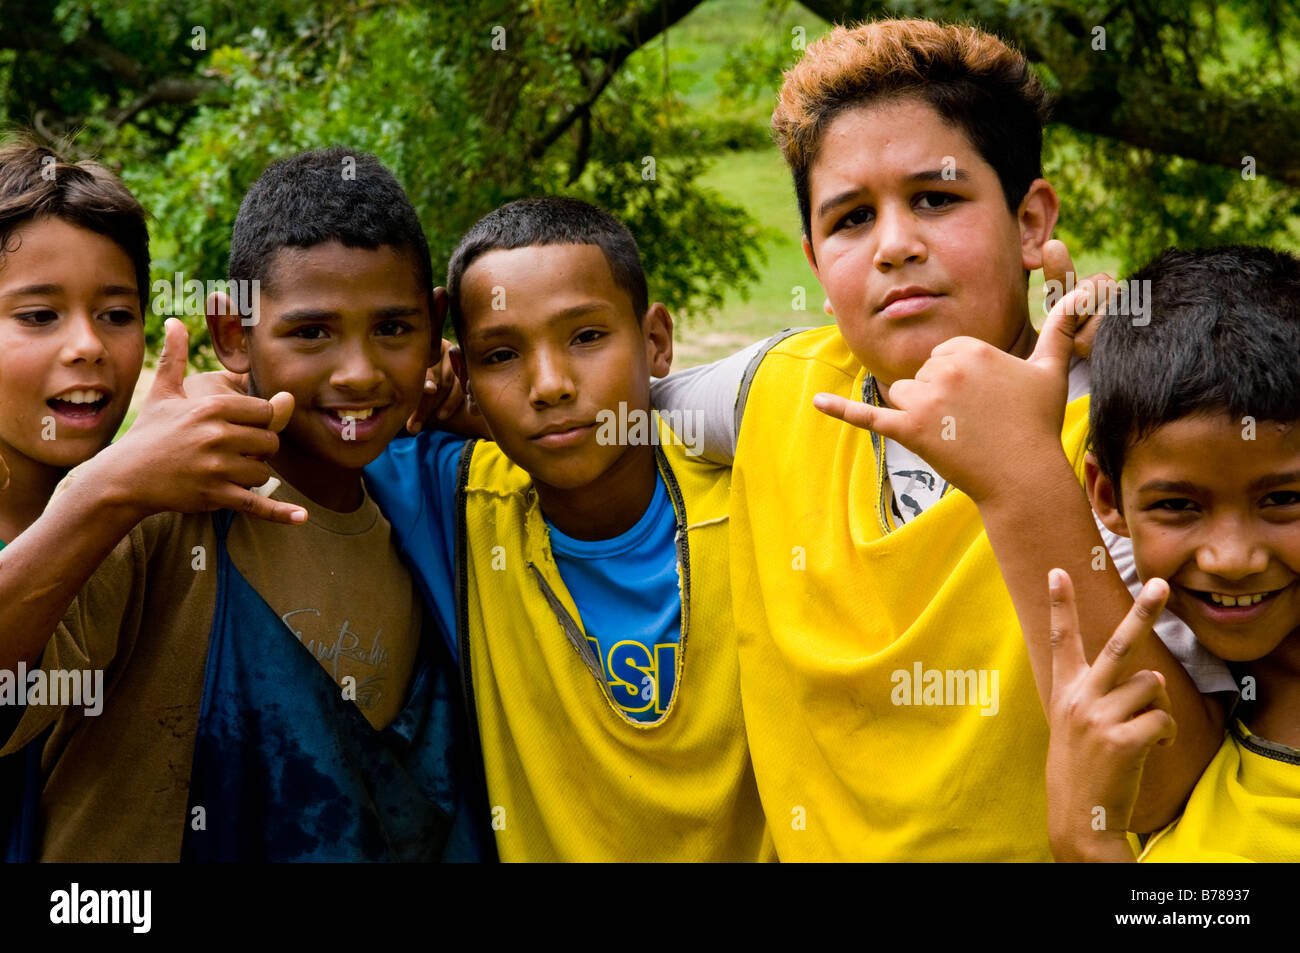 Brazilian youth pose for a photograph. Stock Photo